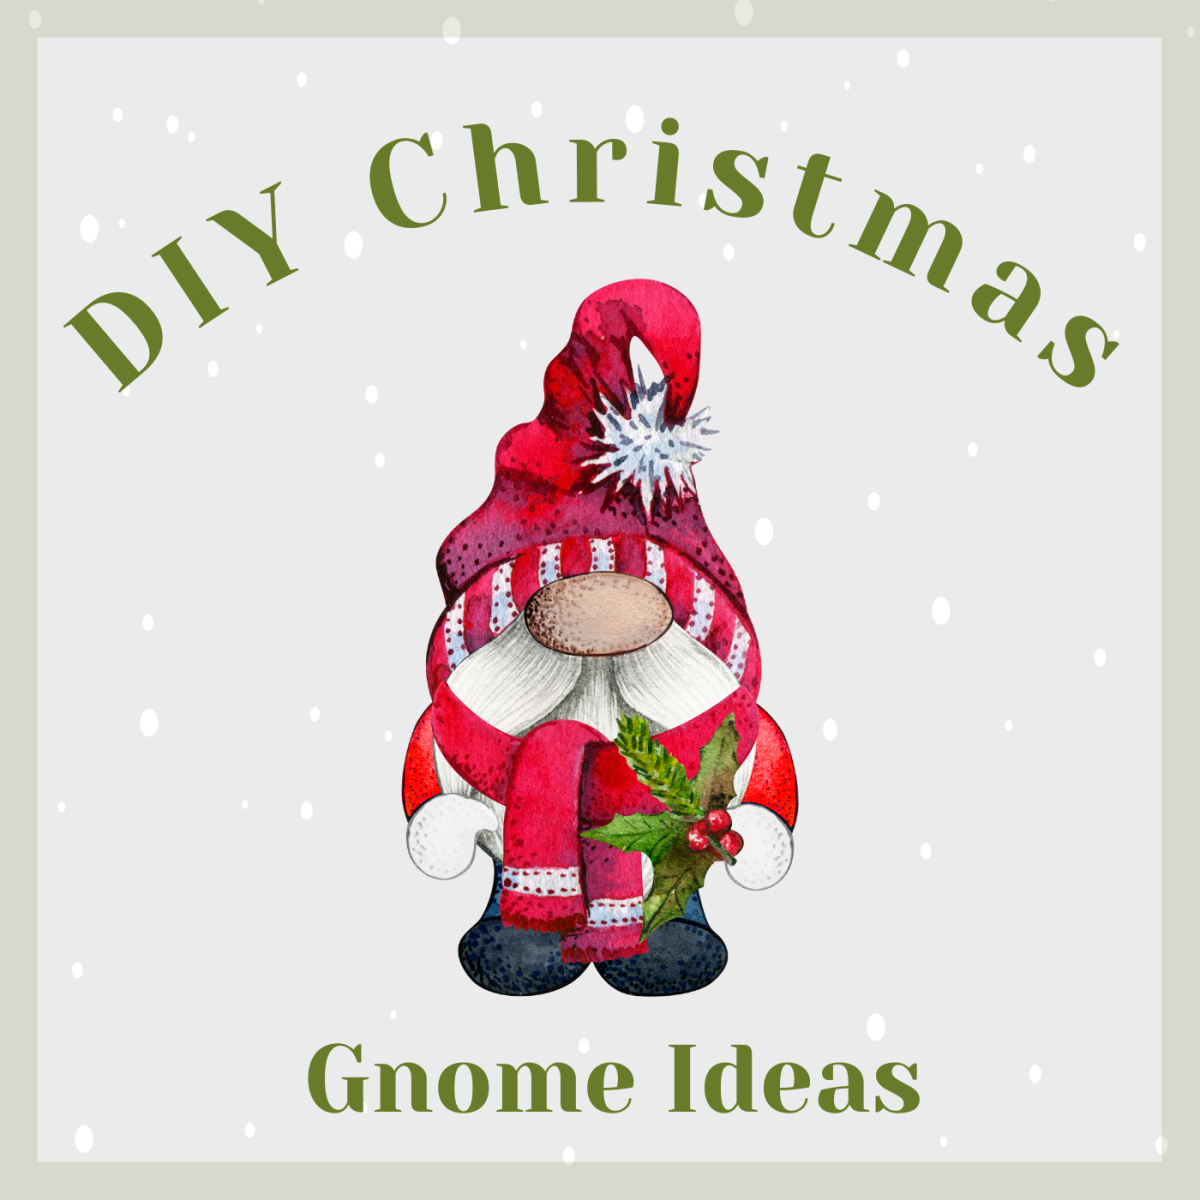 50+ Festive DIY Christmas Tree Gnomes That Work for a Grinch Theme